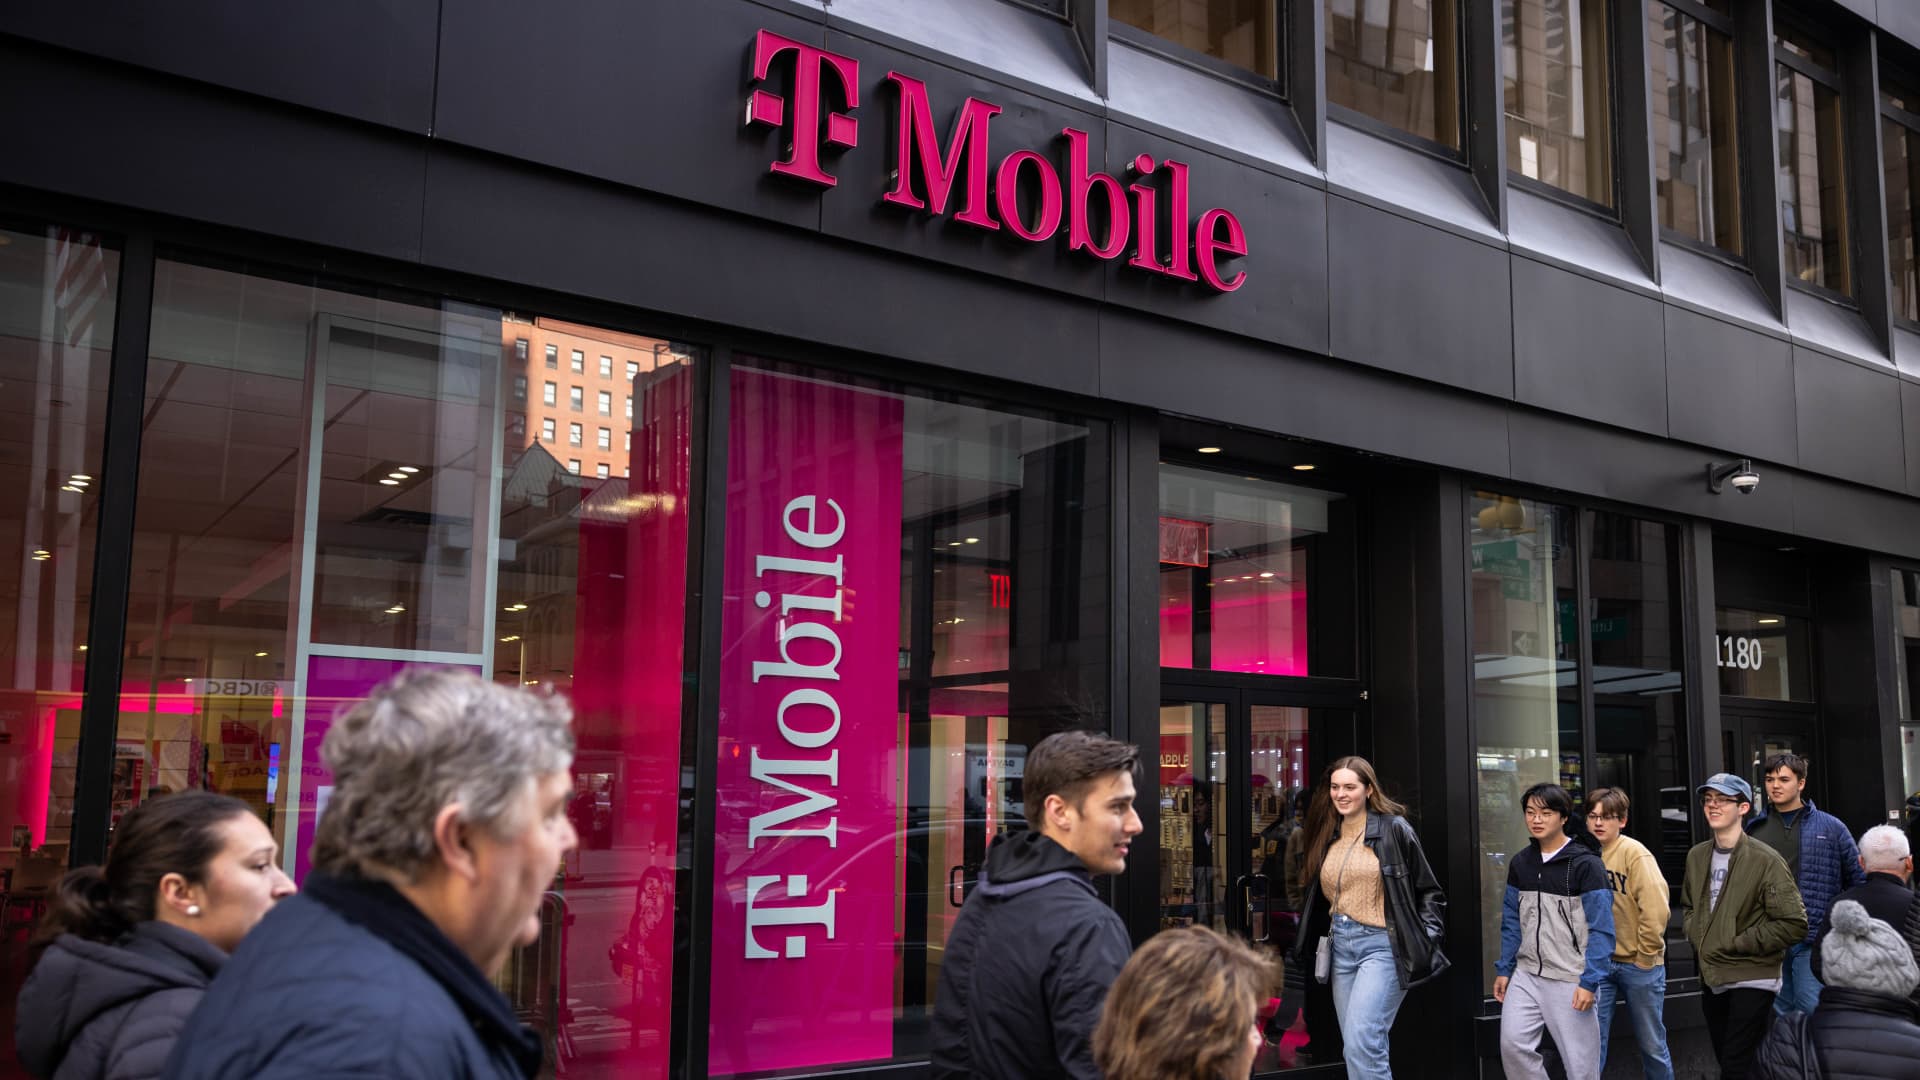 T-Mobile sued after employee stole nude images from phone